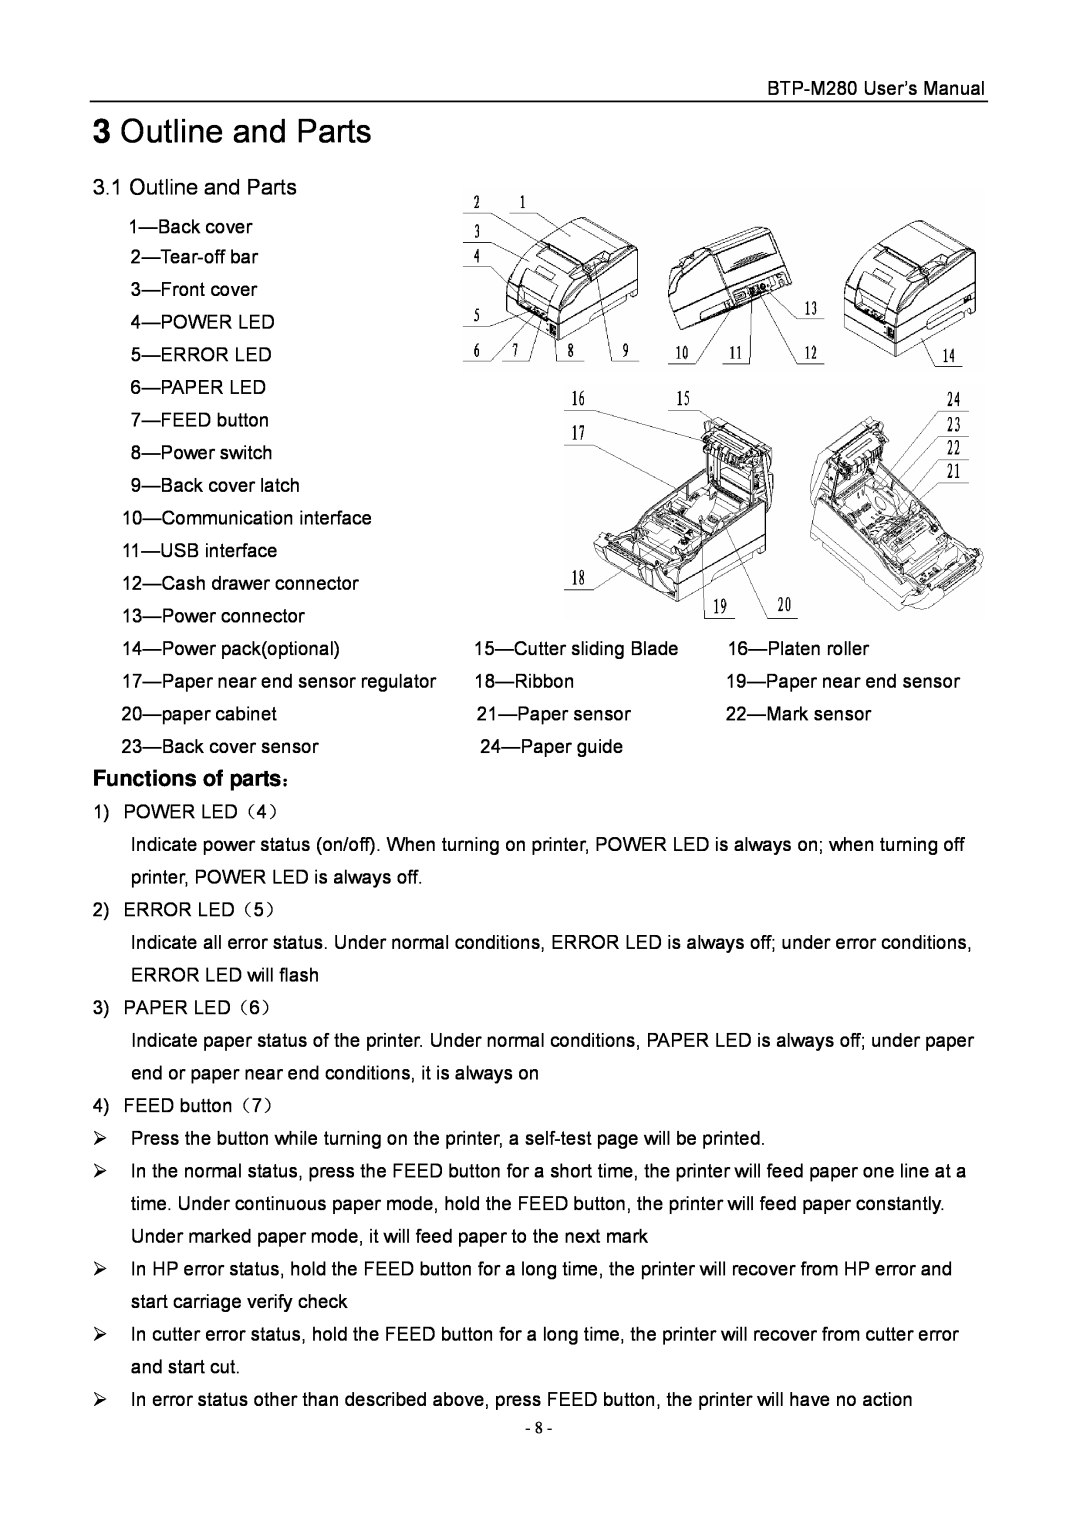 Jiaye General Merchandise Co BTP-M280 user manual Outline and Parts, Functions of parts： 